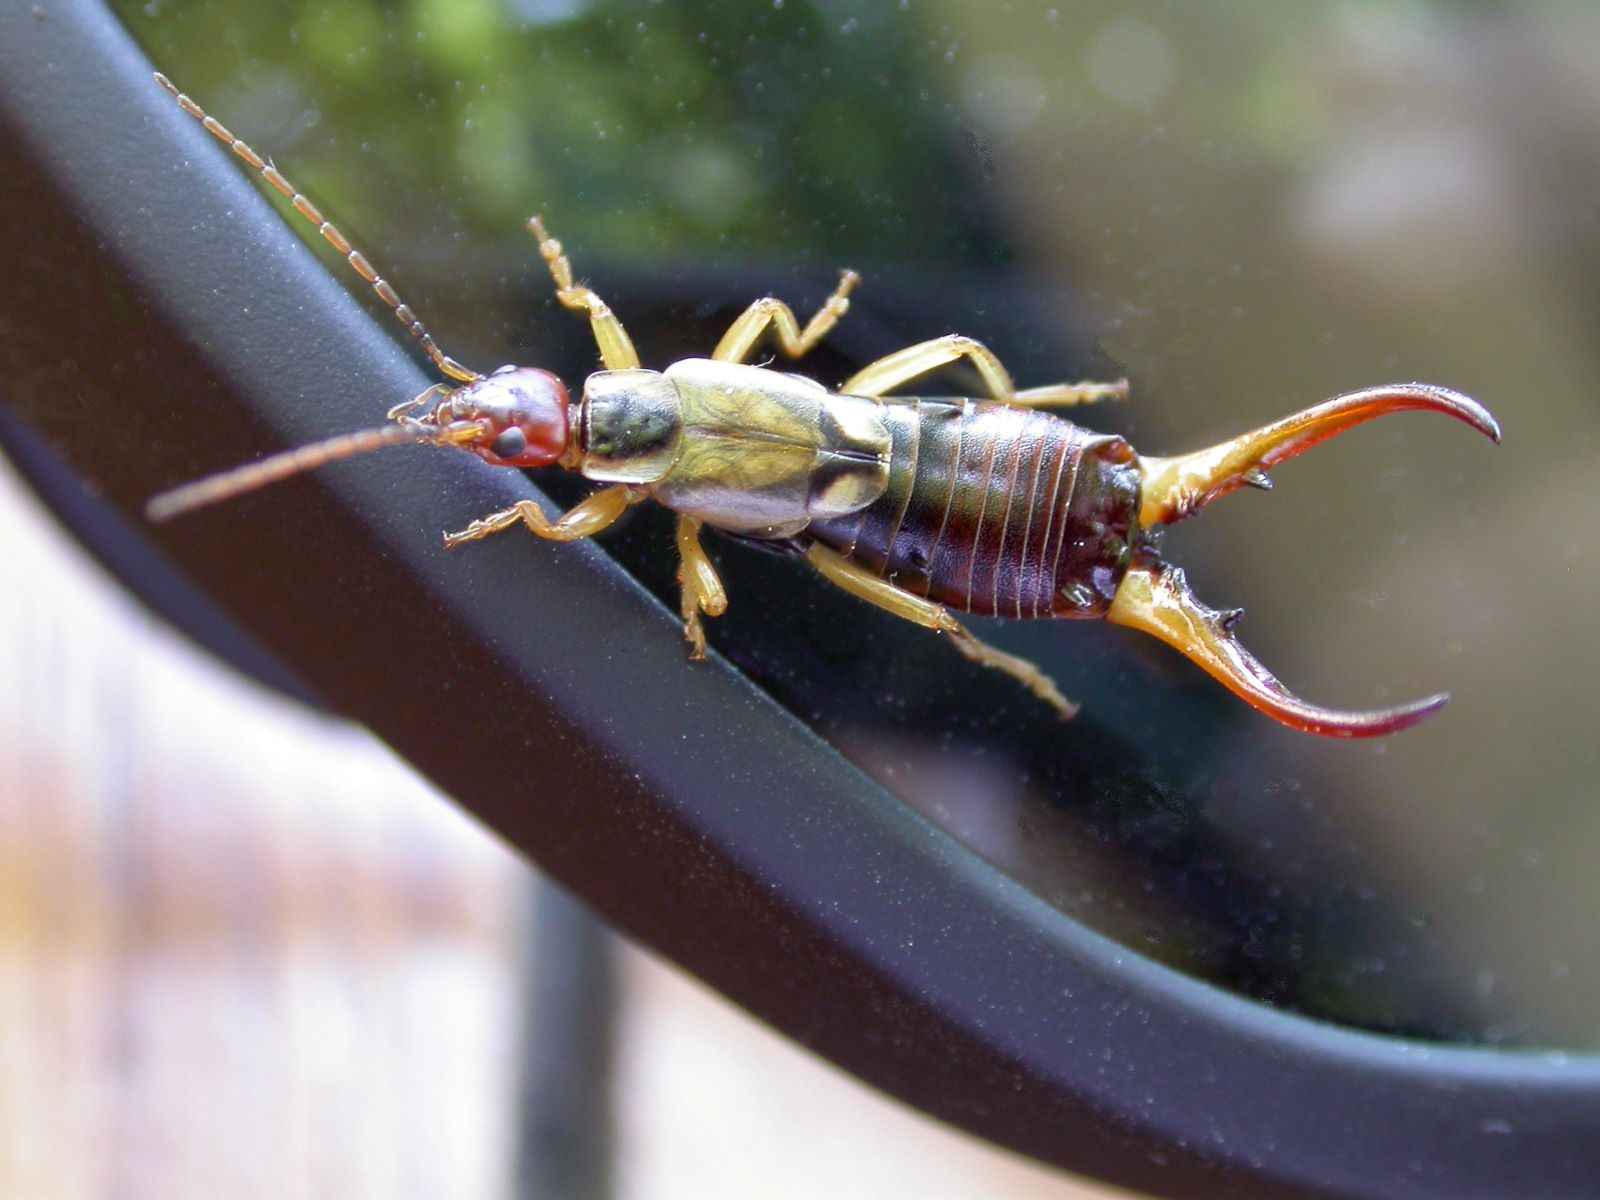 Mysterious Invasion: Unexplained Earwig Infestation In Parents' House